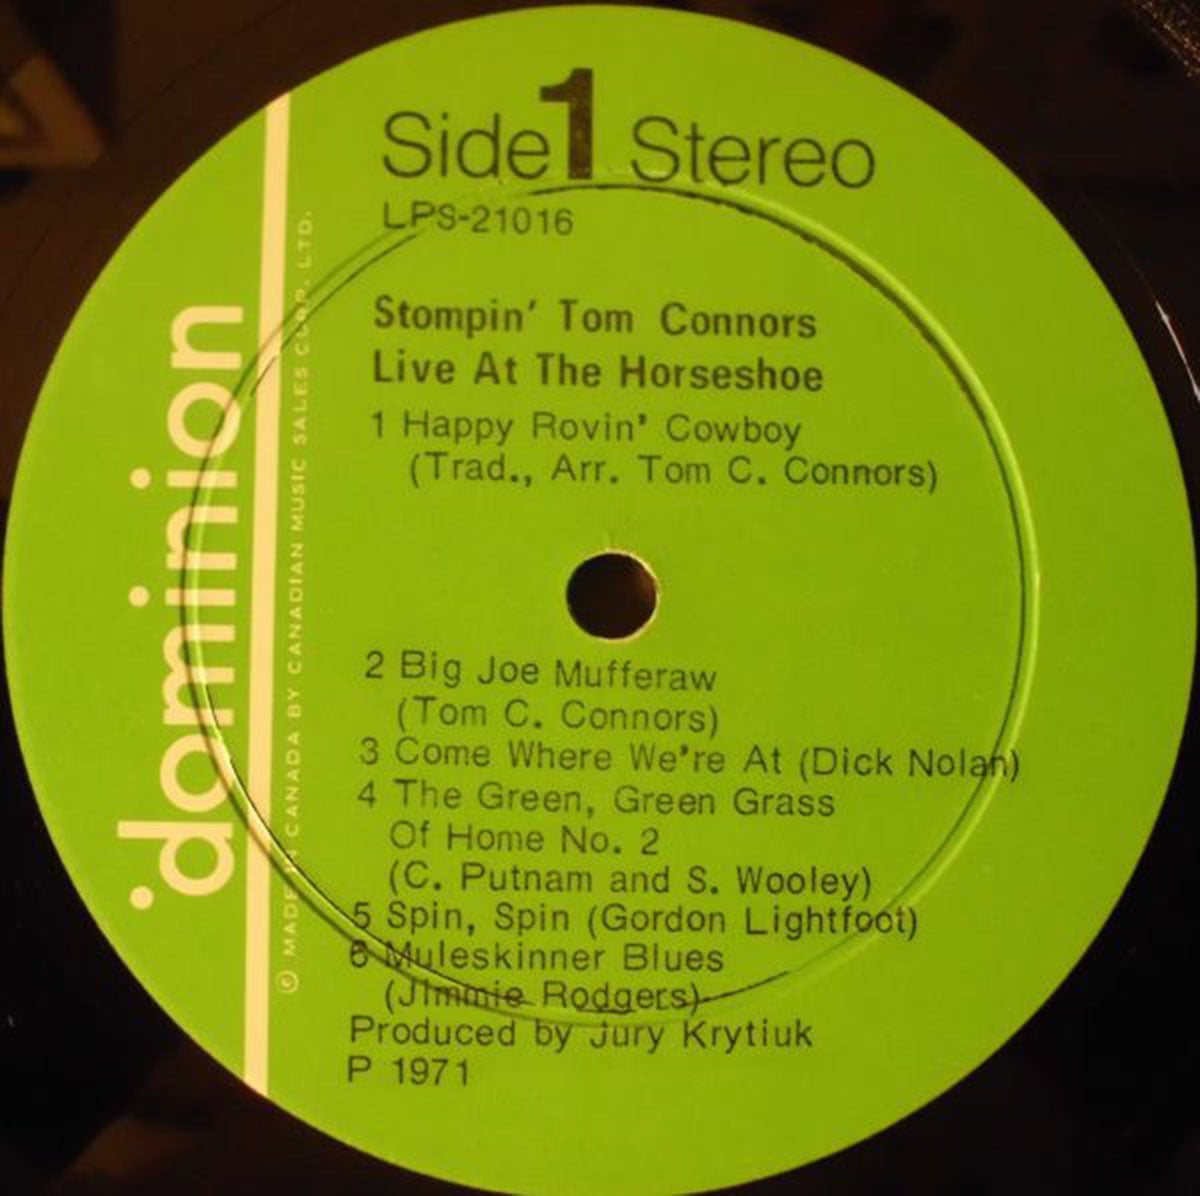 Stompin' Tom Connors – Live At The Horseshoe